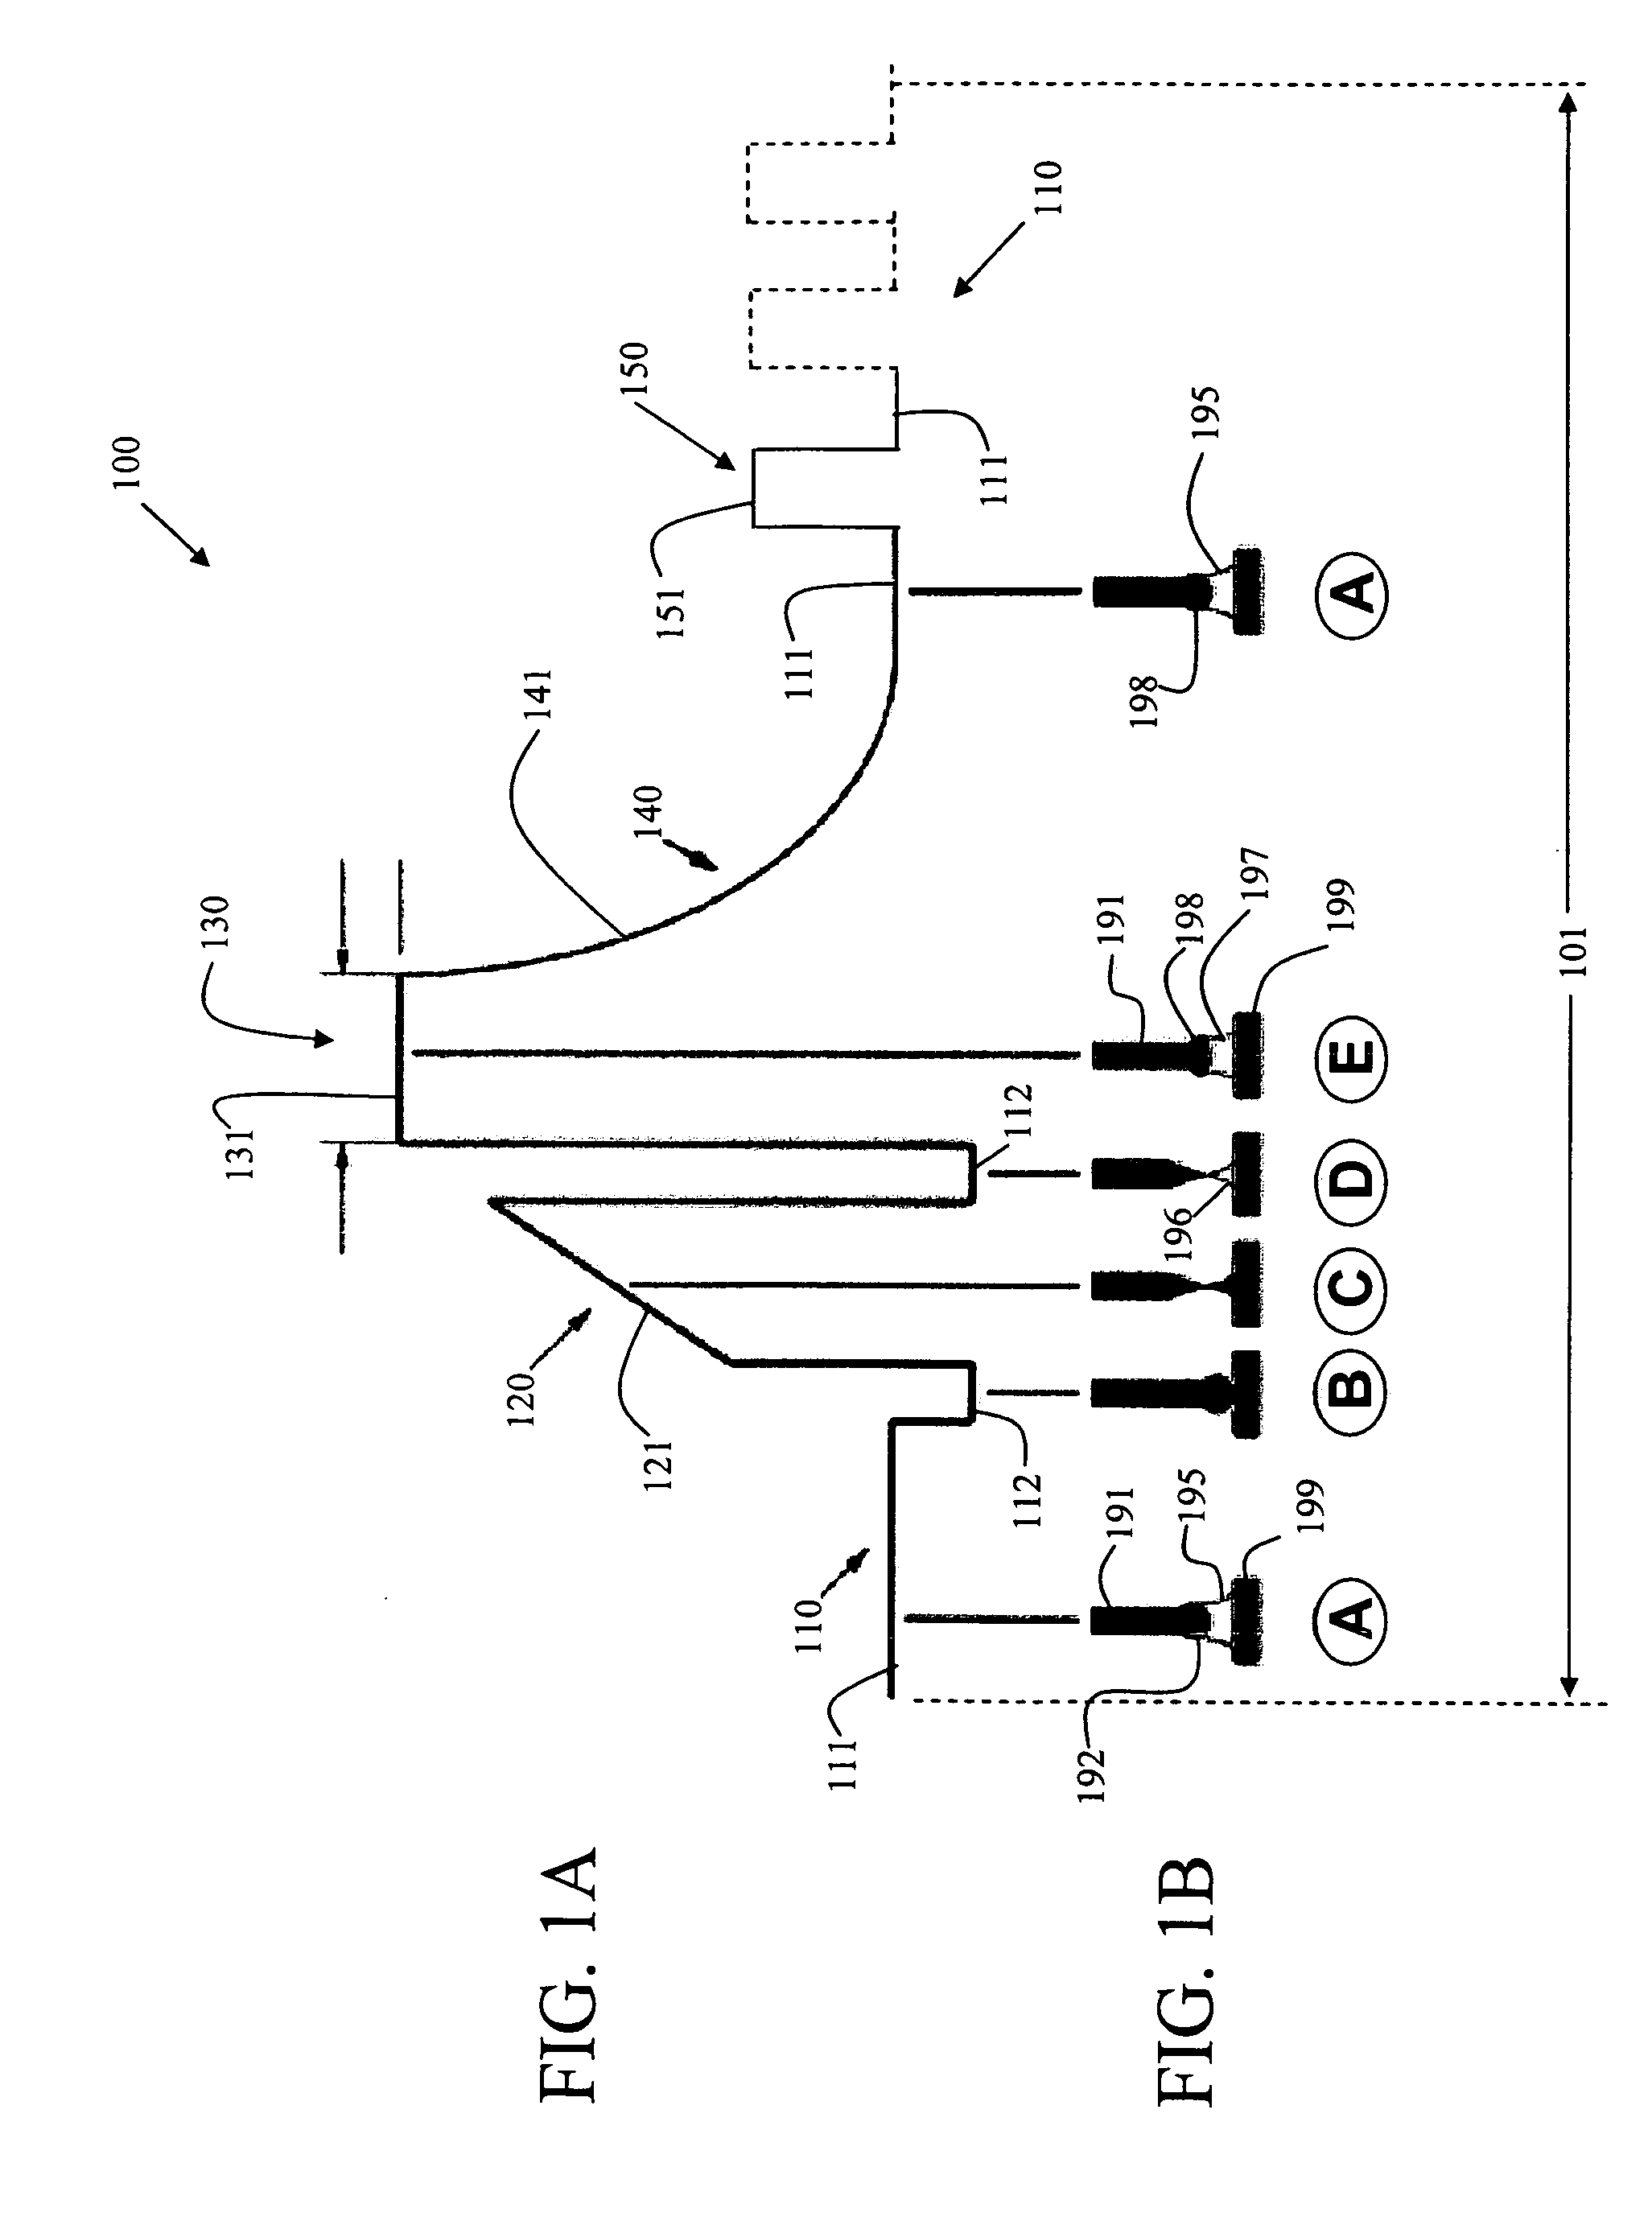 Method and System to Increase Heat Input To a Weld During a Short-Circuit Arc Welding Process